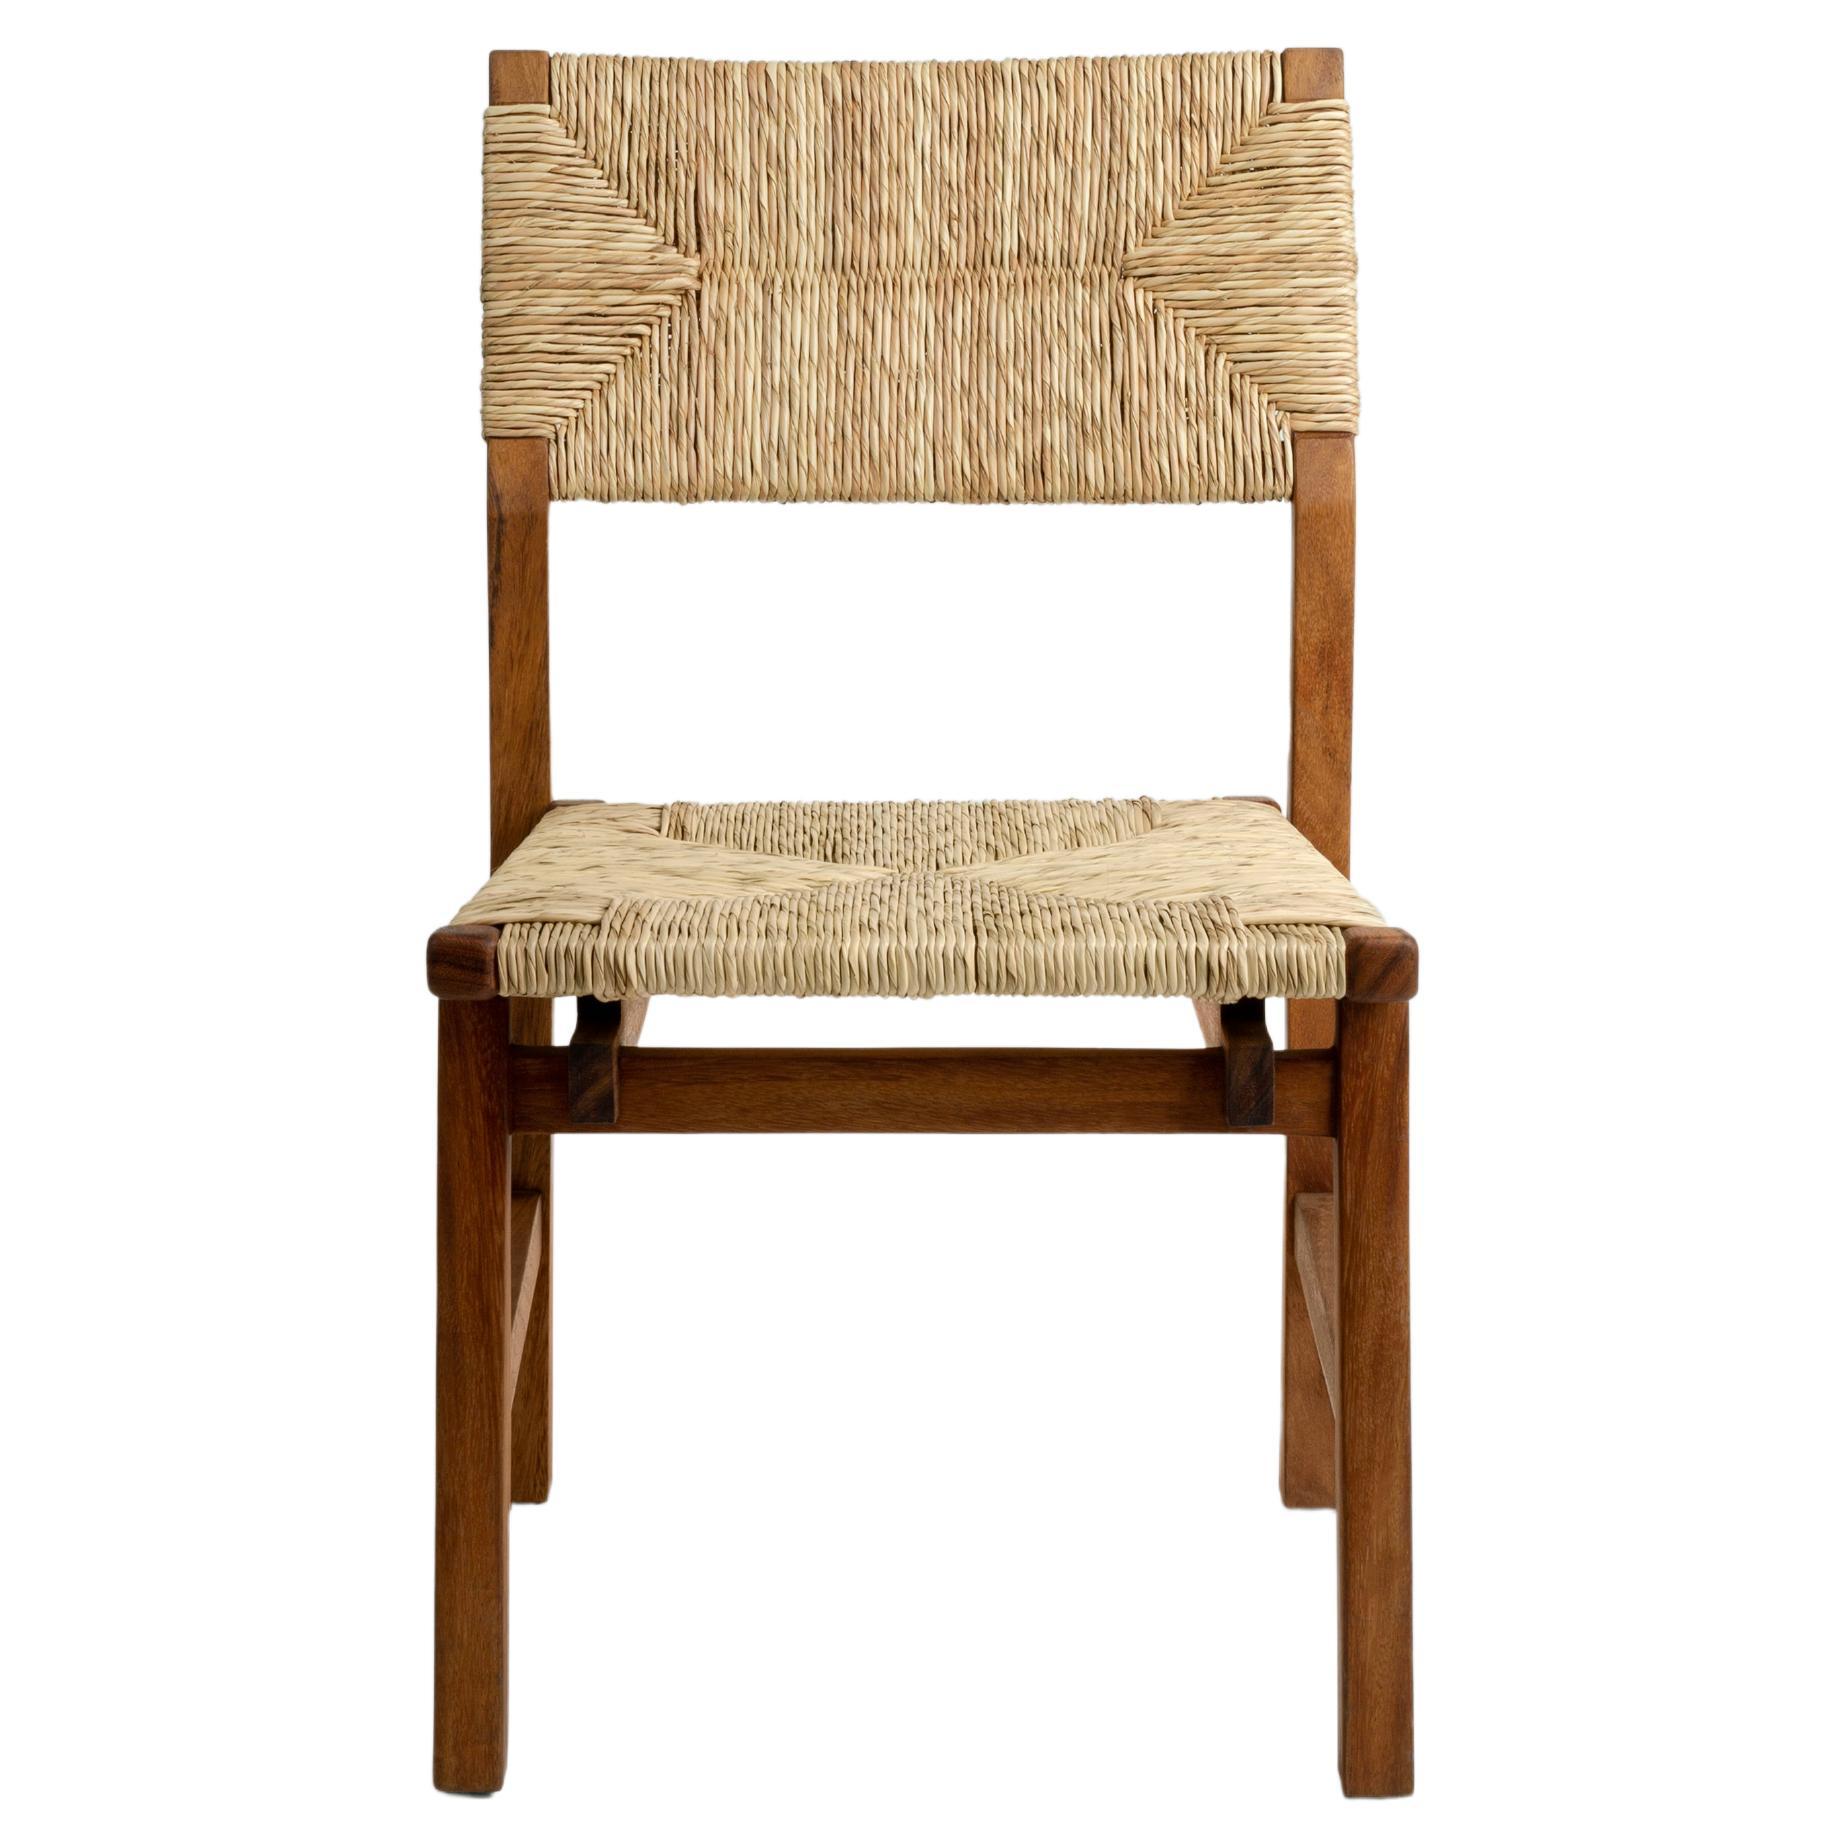 Customizable Modern Dining chair Lago, Solid wood, handcrafted natural fiber. For Sale